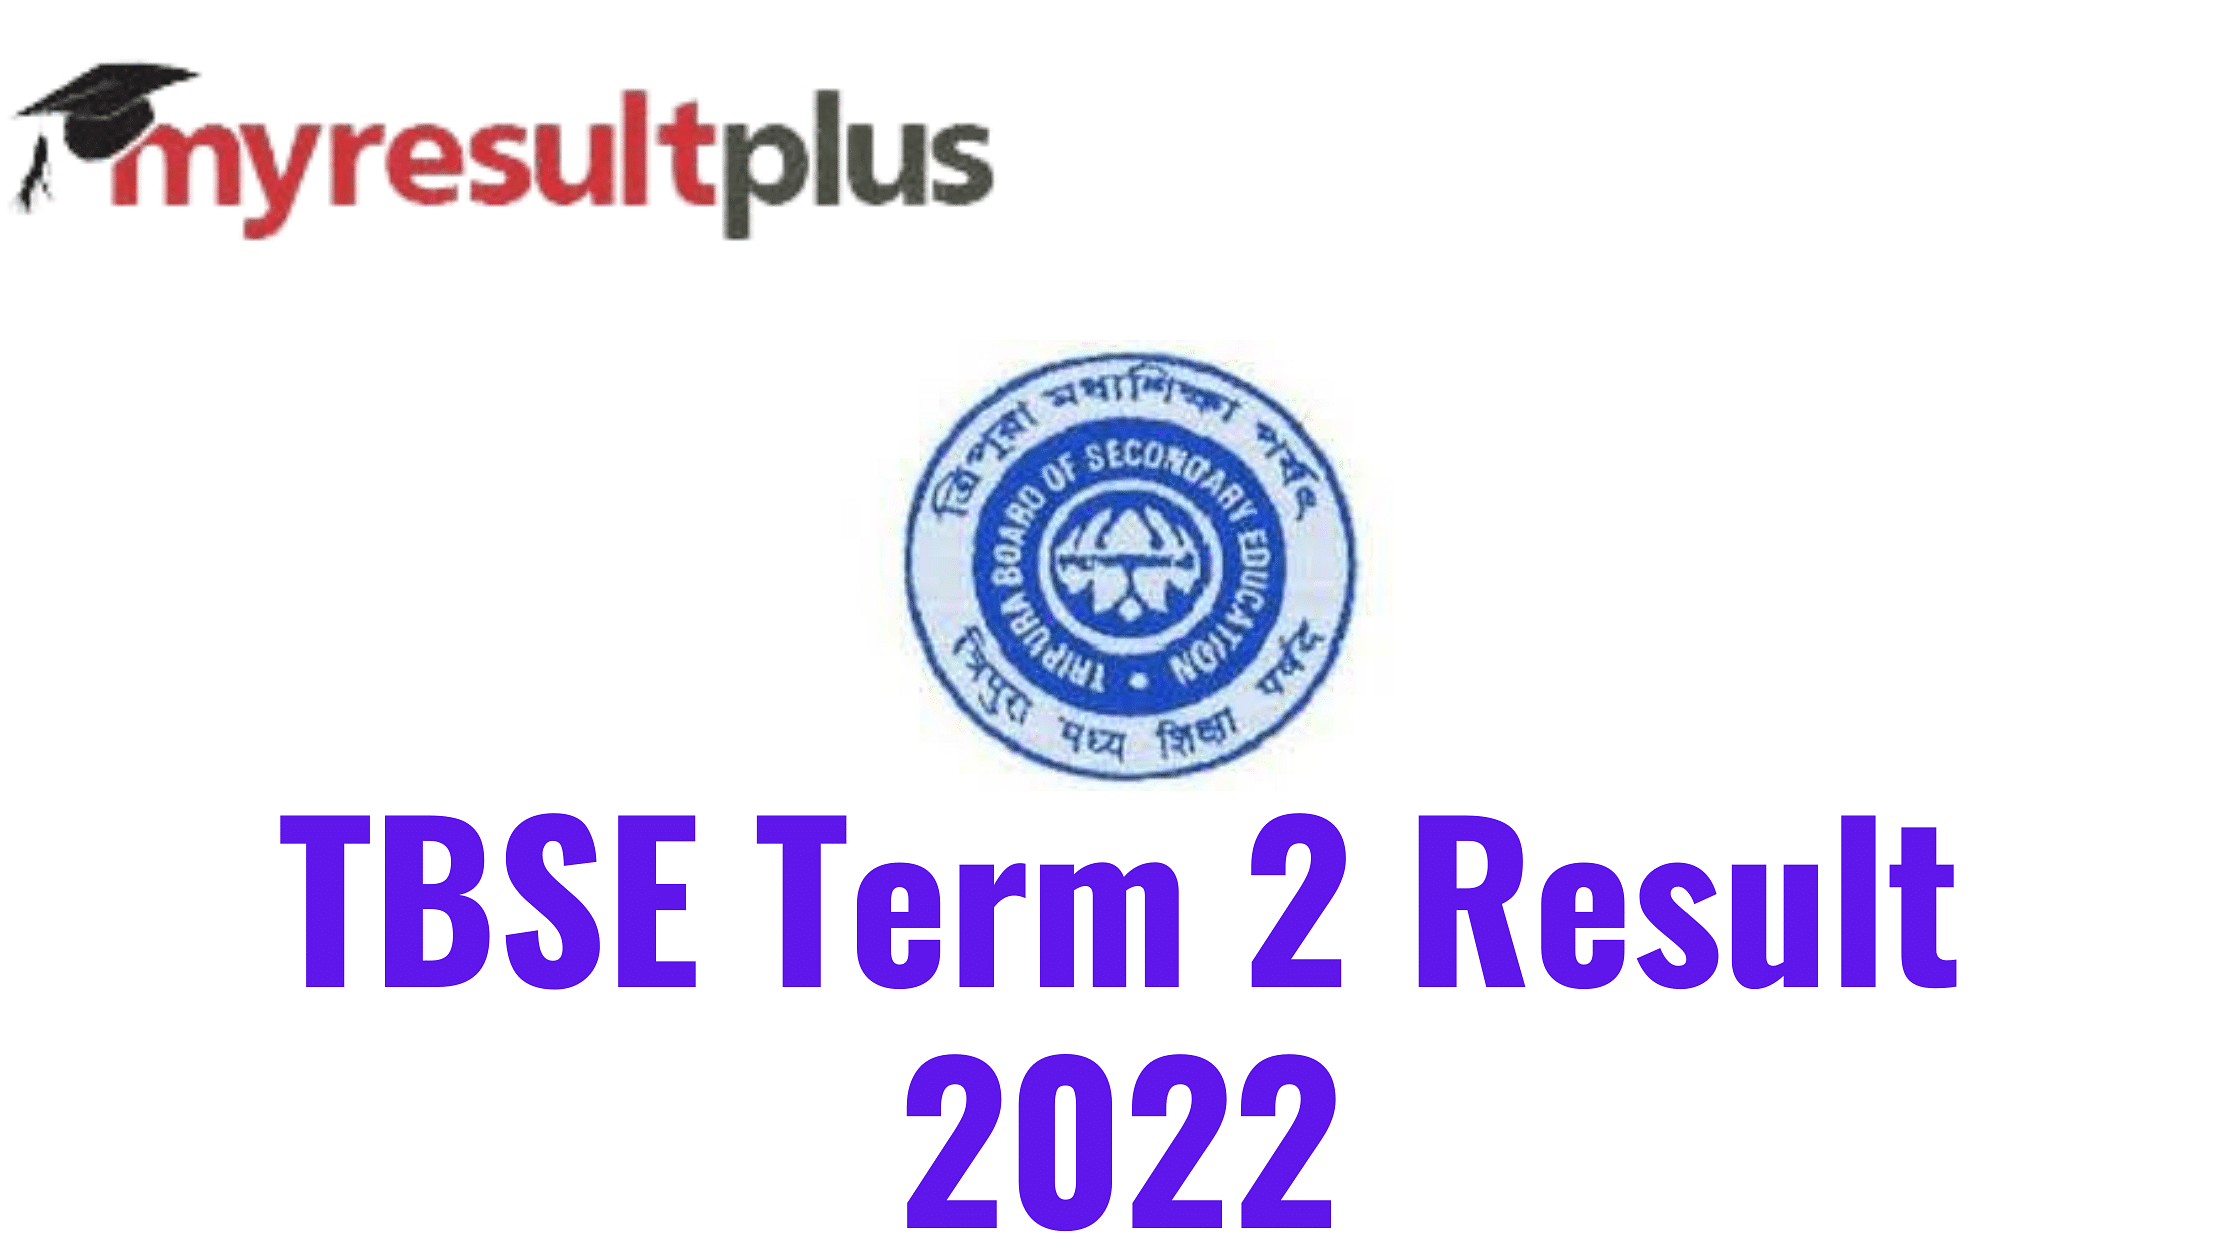 TBSE Term 2 Result 2022 For 10th and 12th to Be Declared on This Date, Check Official Updates Here